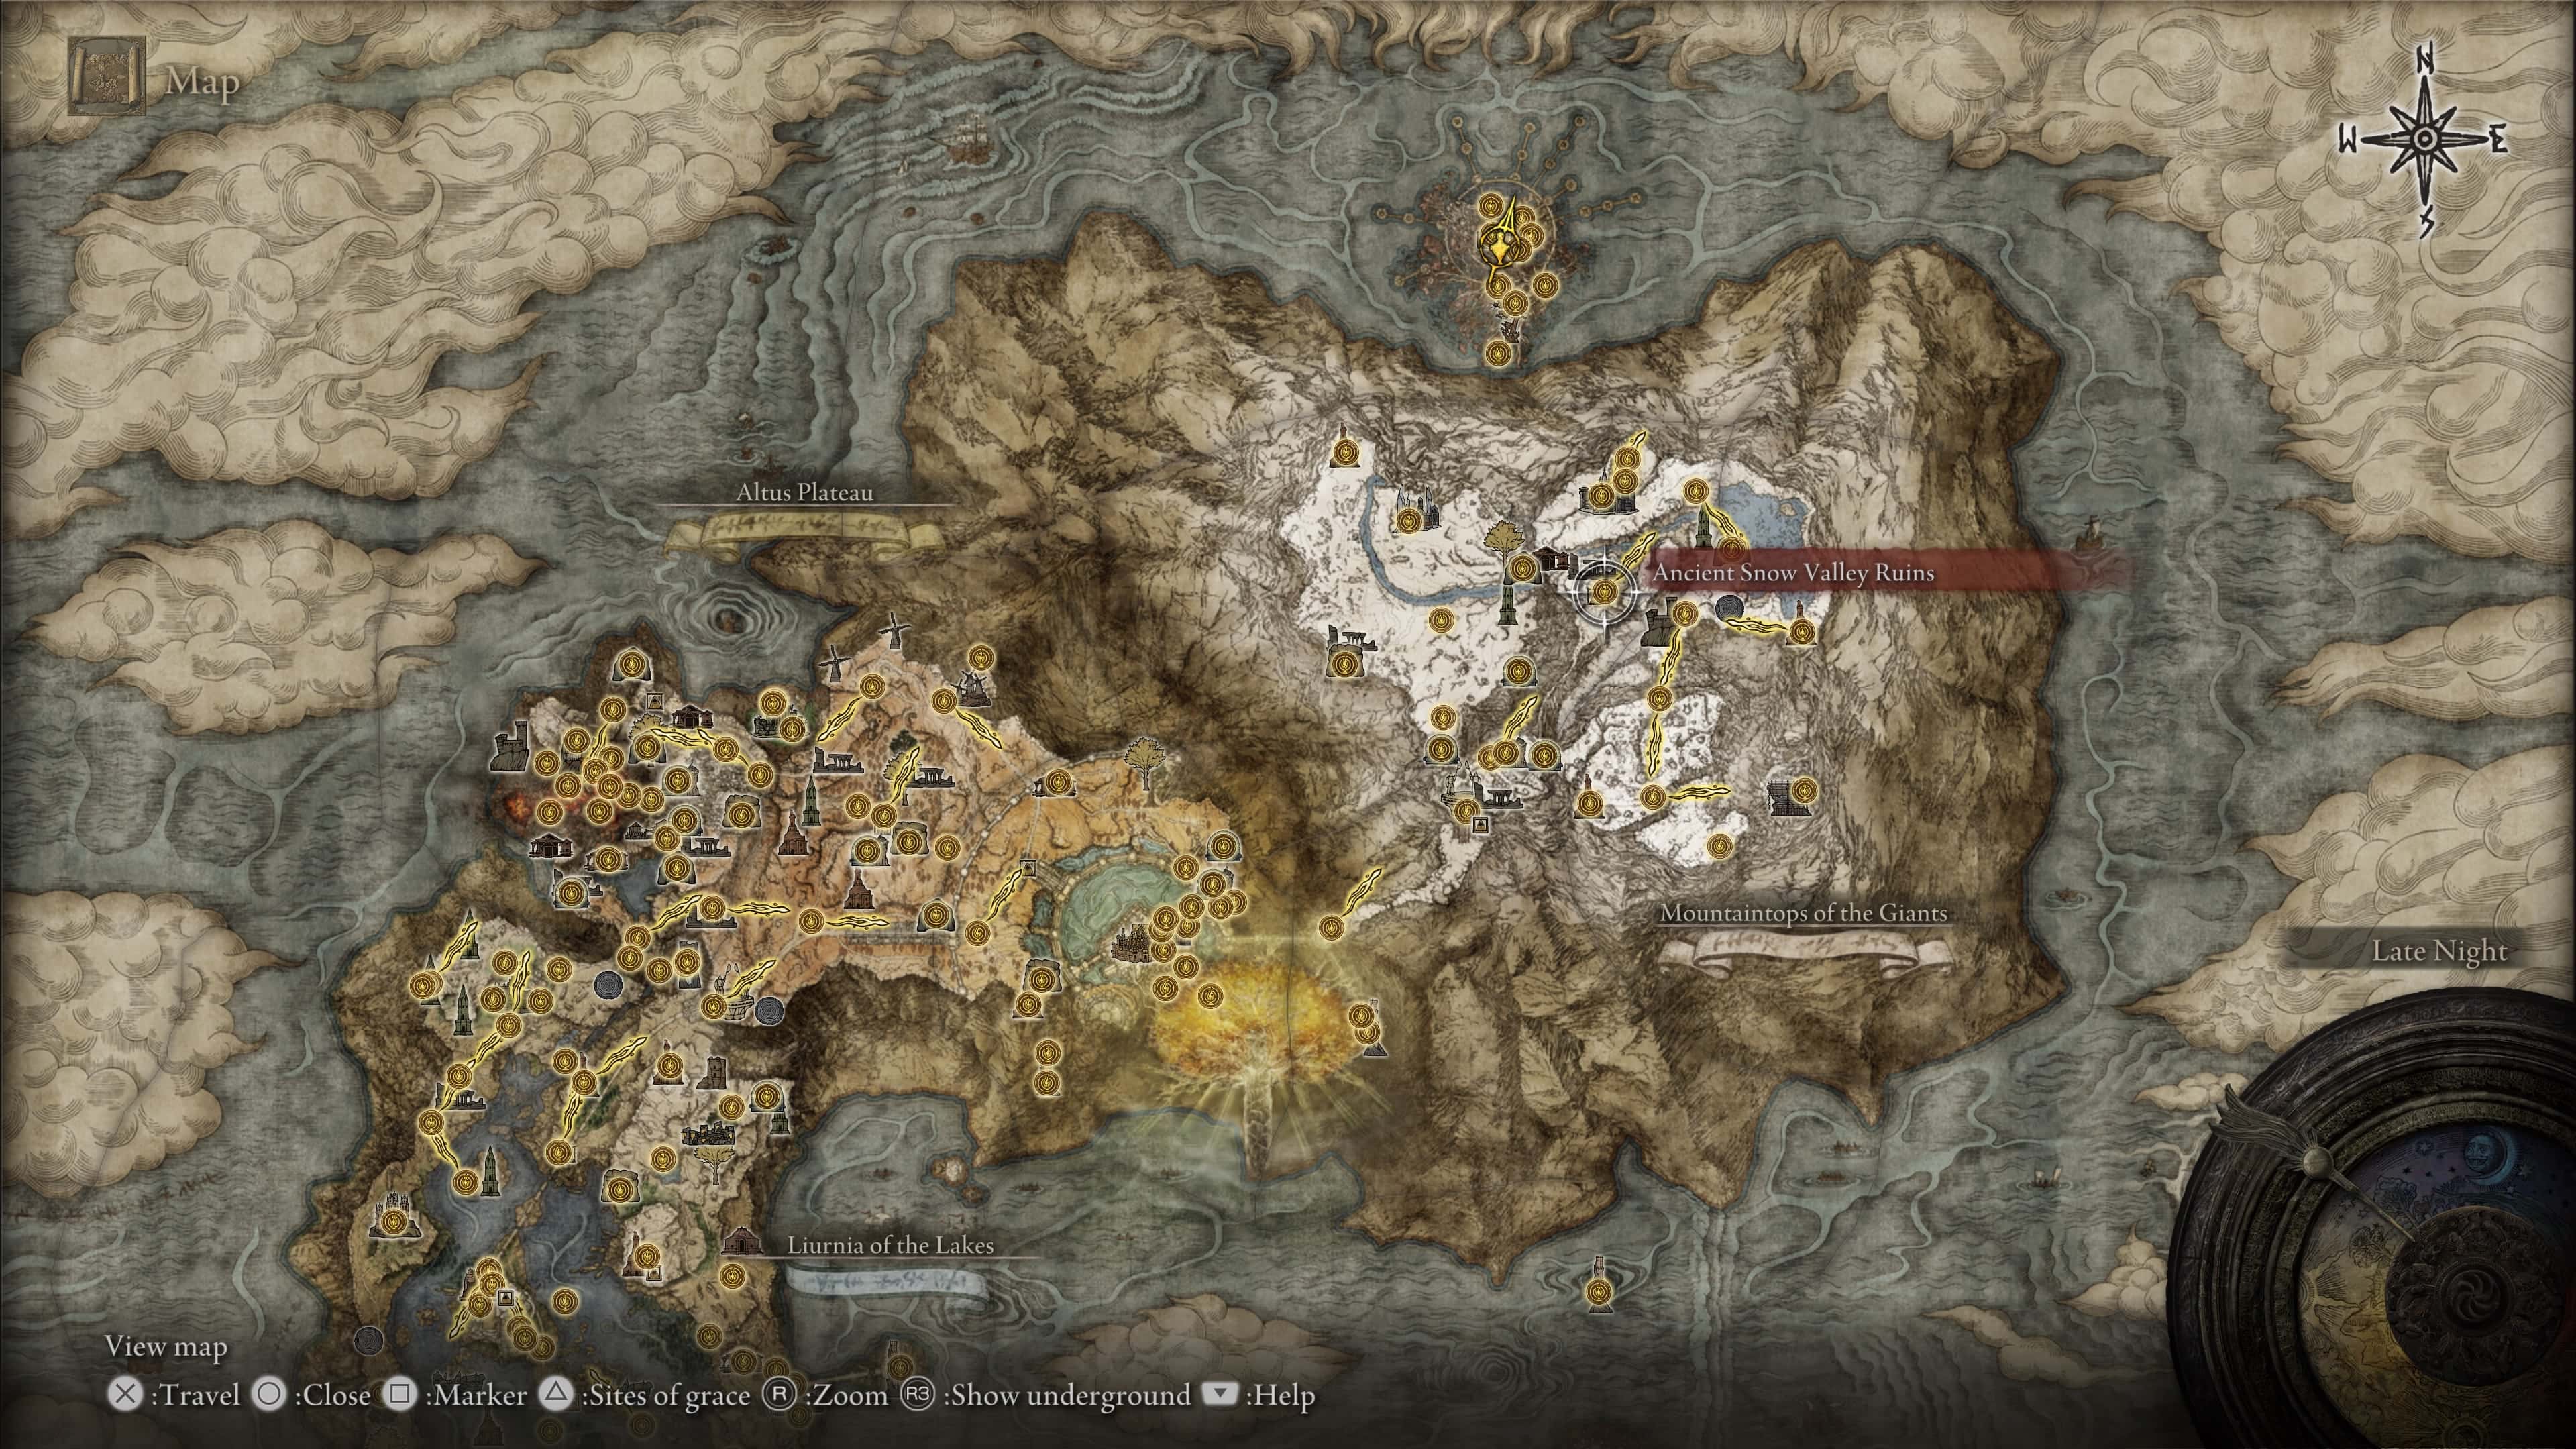 elden ring setting: Image shows the map of the Mountaintops of the Giants, a setting in Elden Ring